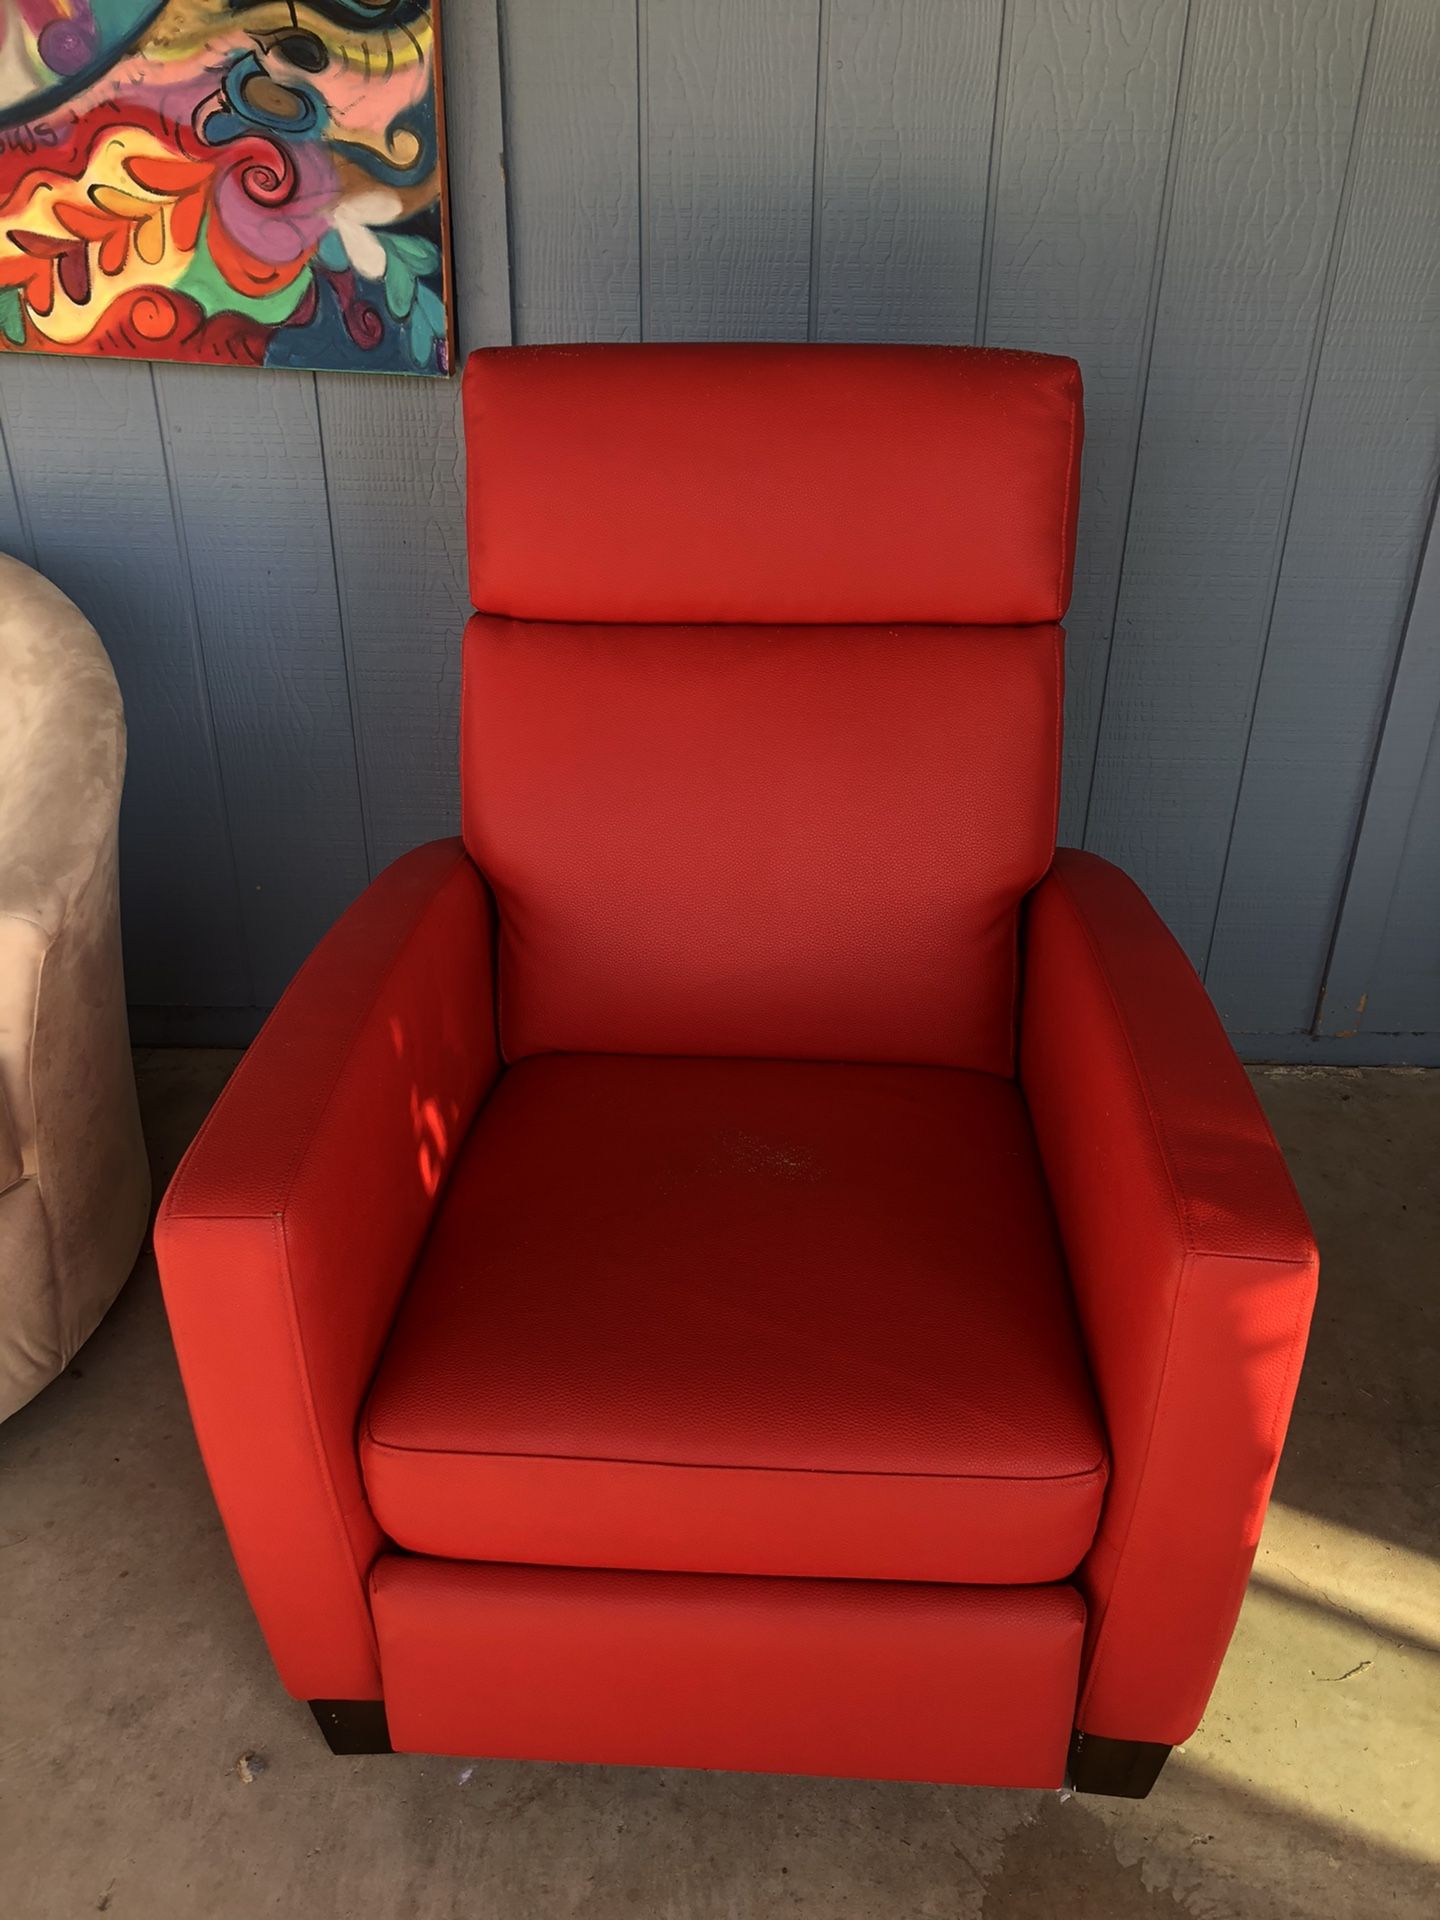 Recliner red chair